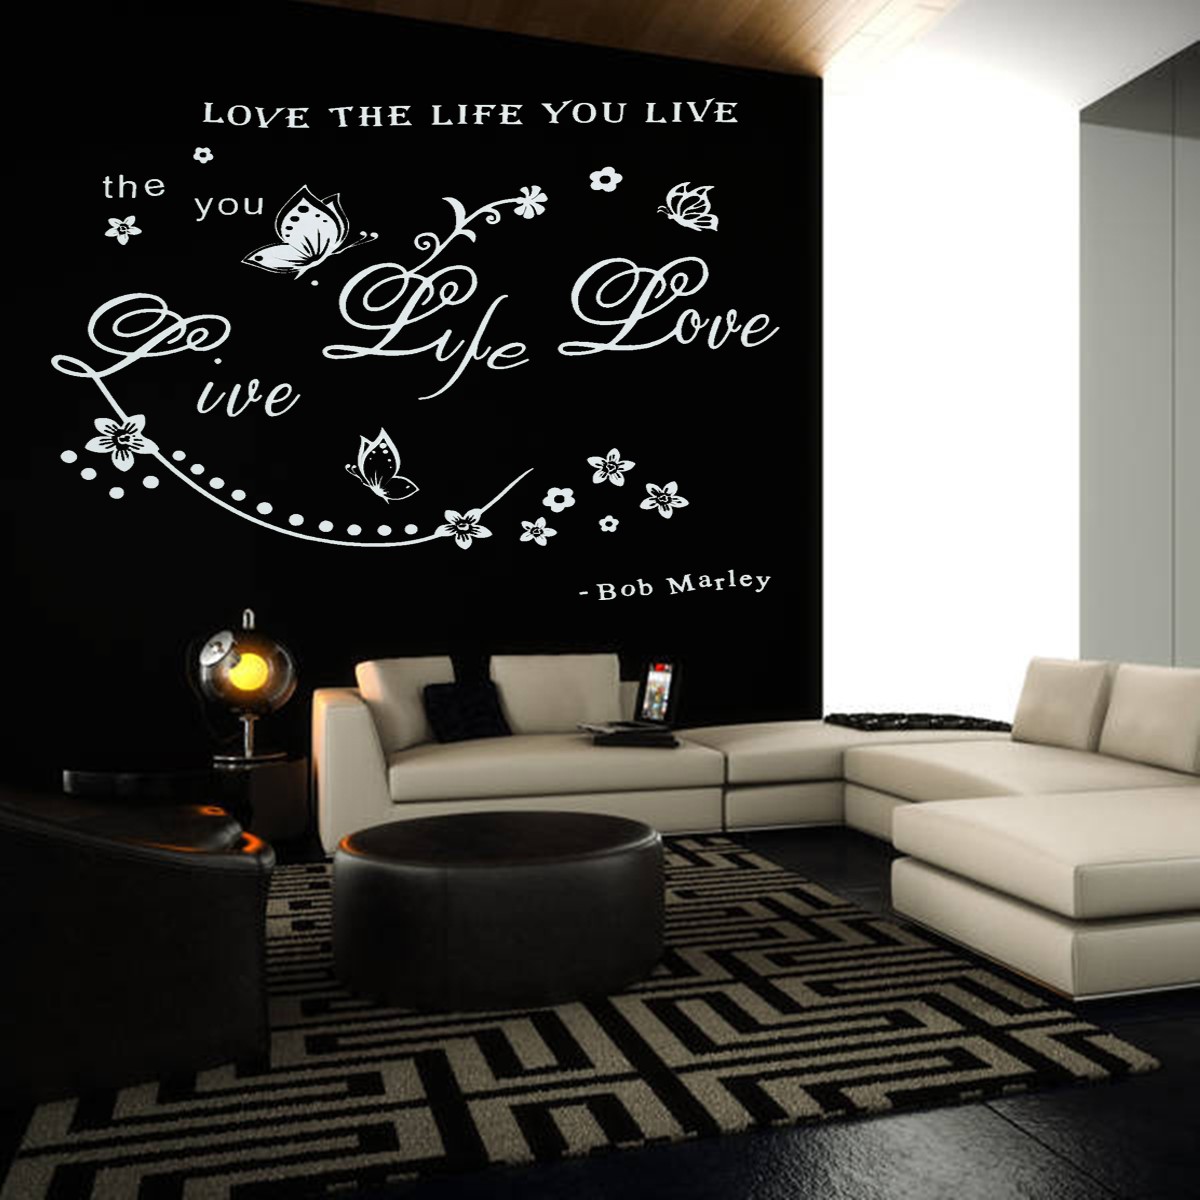 Removable-Wall-Sticker-Art-Decals-For-Home-Kitchen-Living-Room-Bedroom-Bathroom-Office-Decor-Water-R-1722049-1